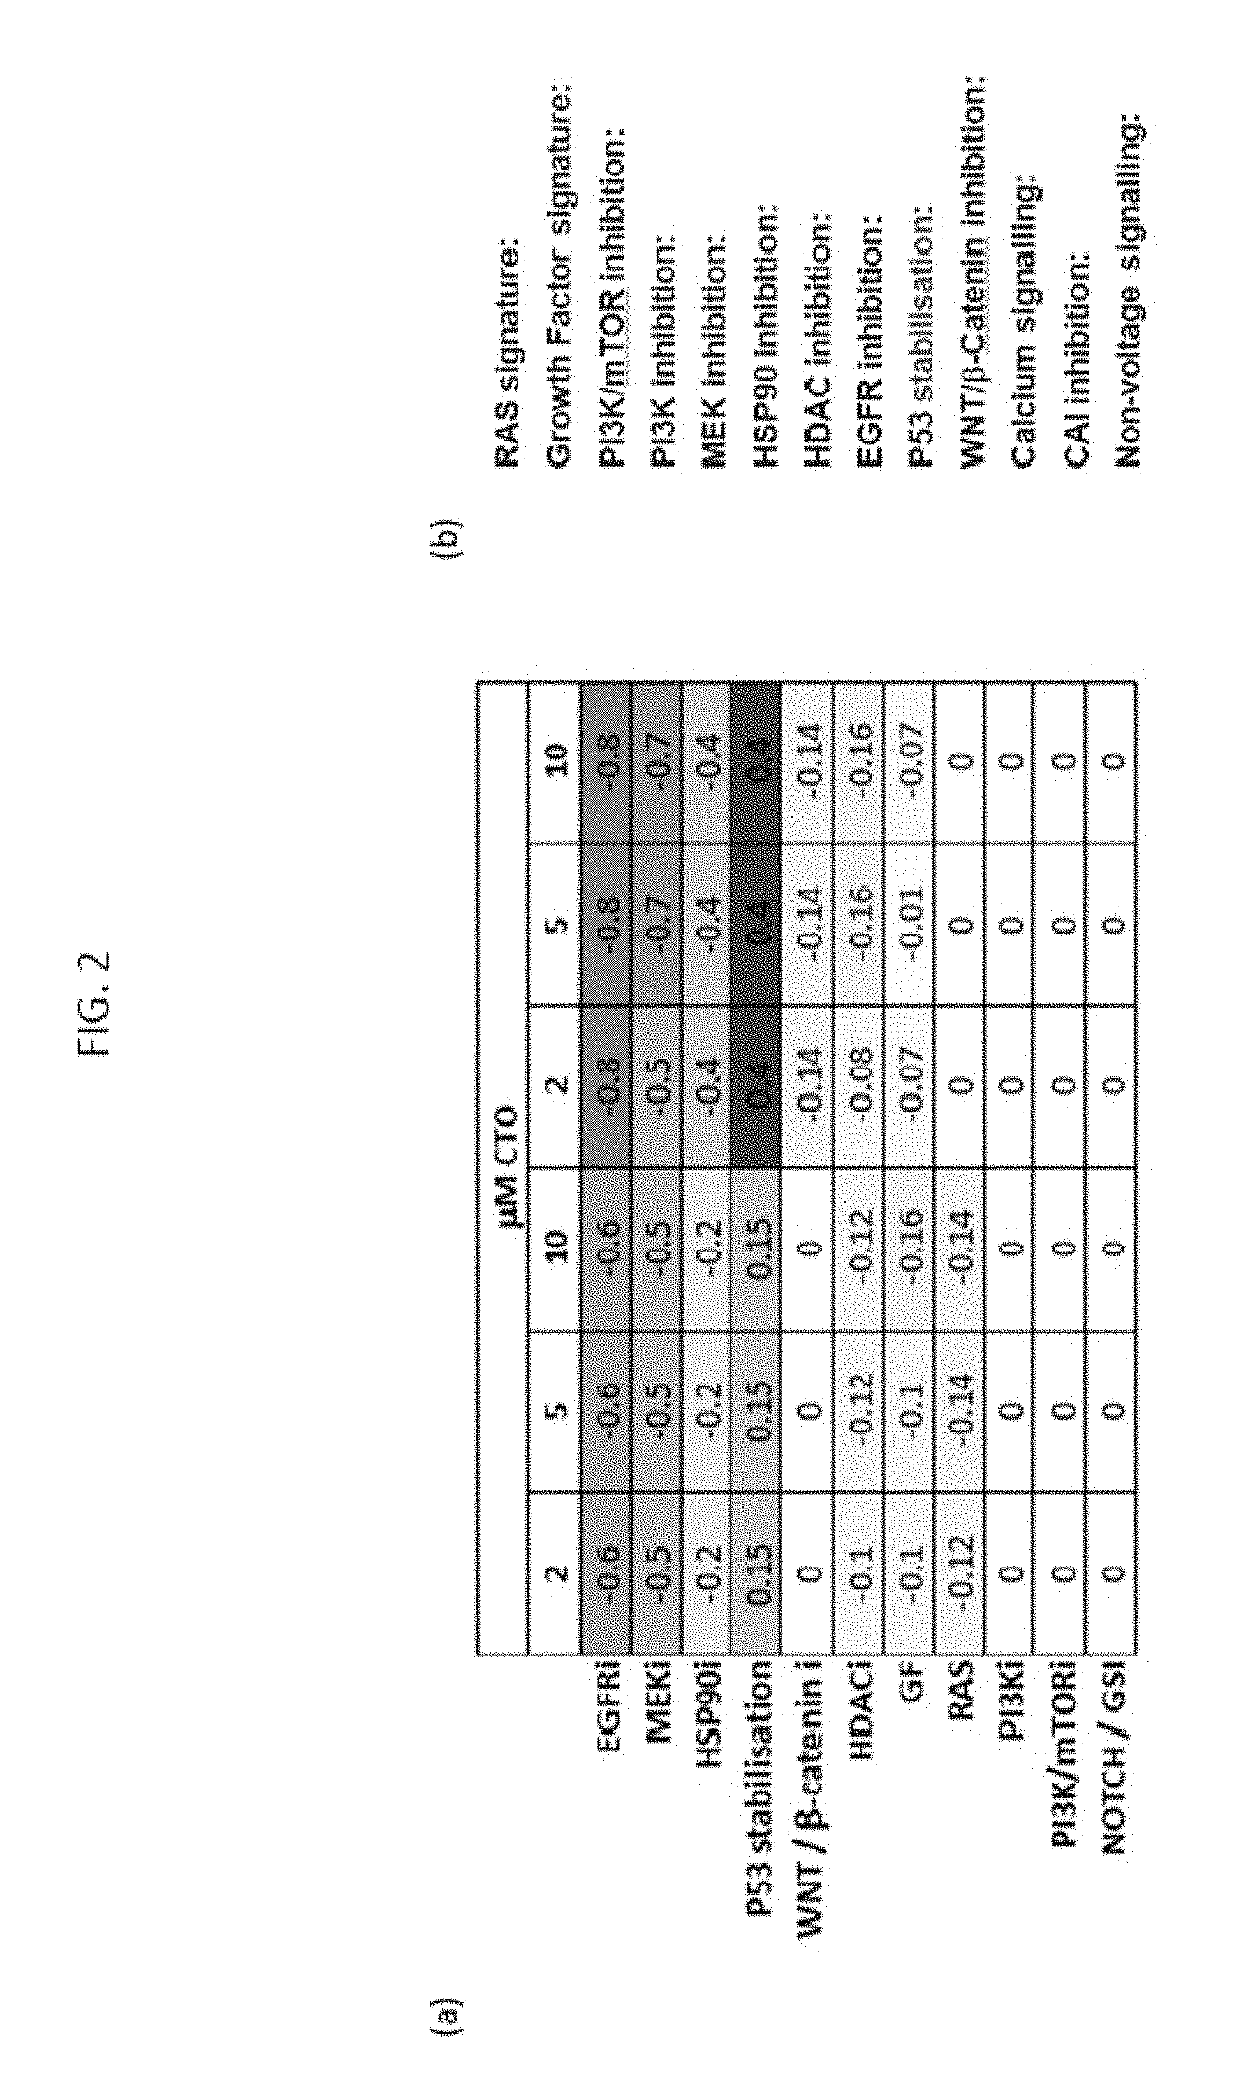 Methods and molecular pharmacodynamic biomarkers for multiple signaling pathways in response to carboxyamidotriazole orotate